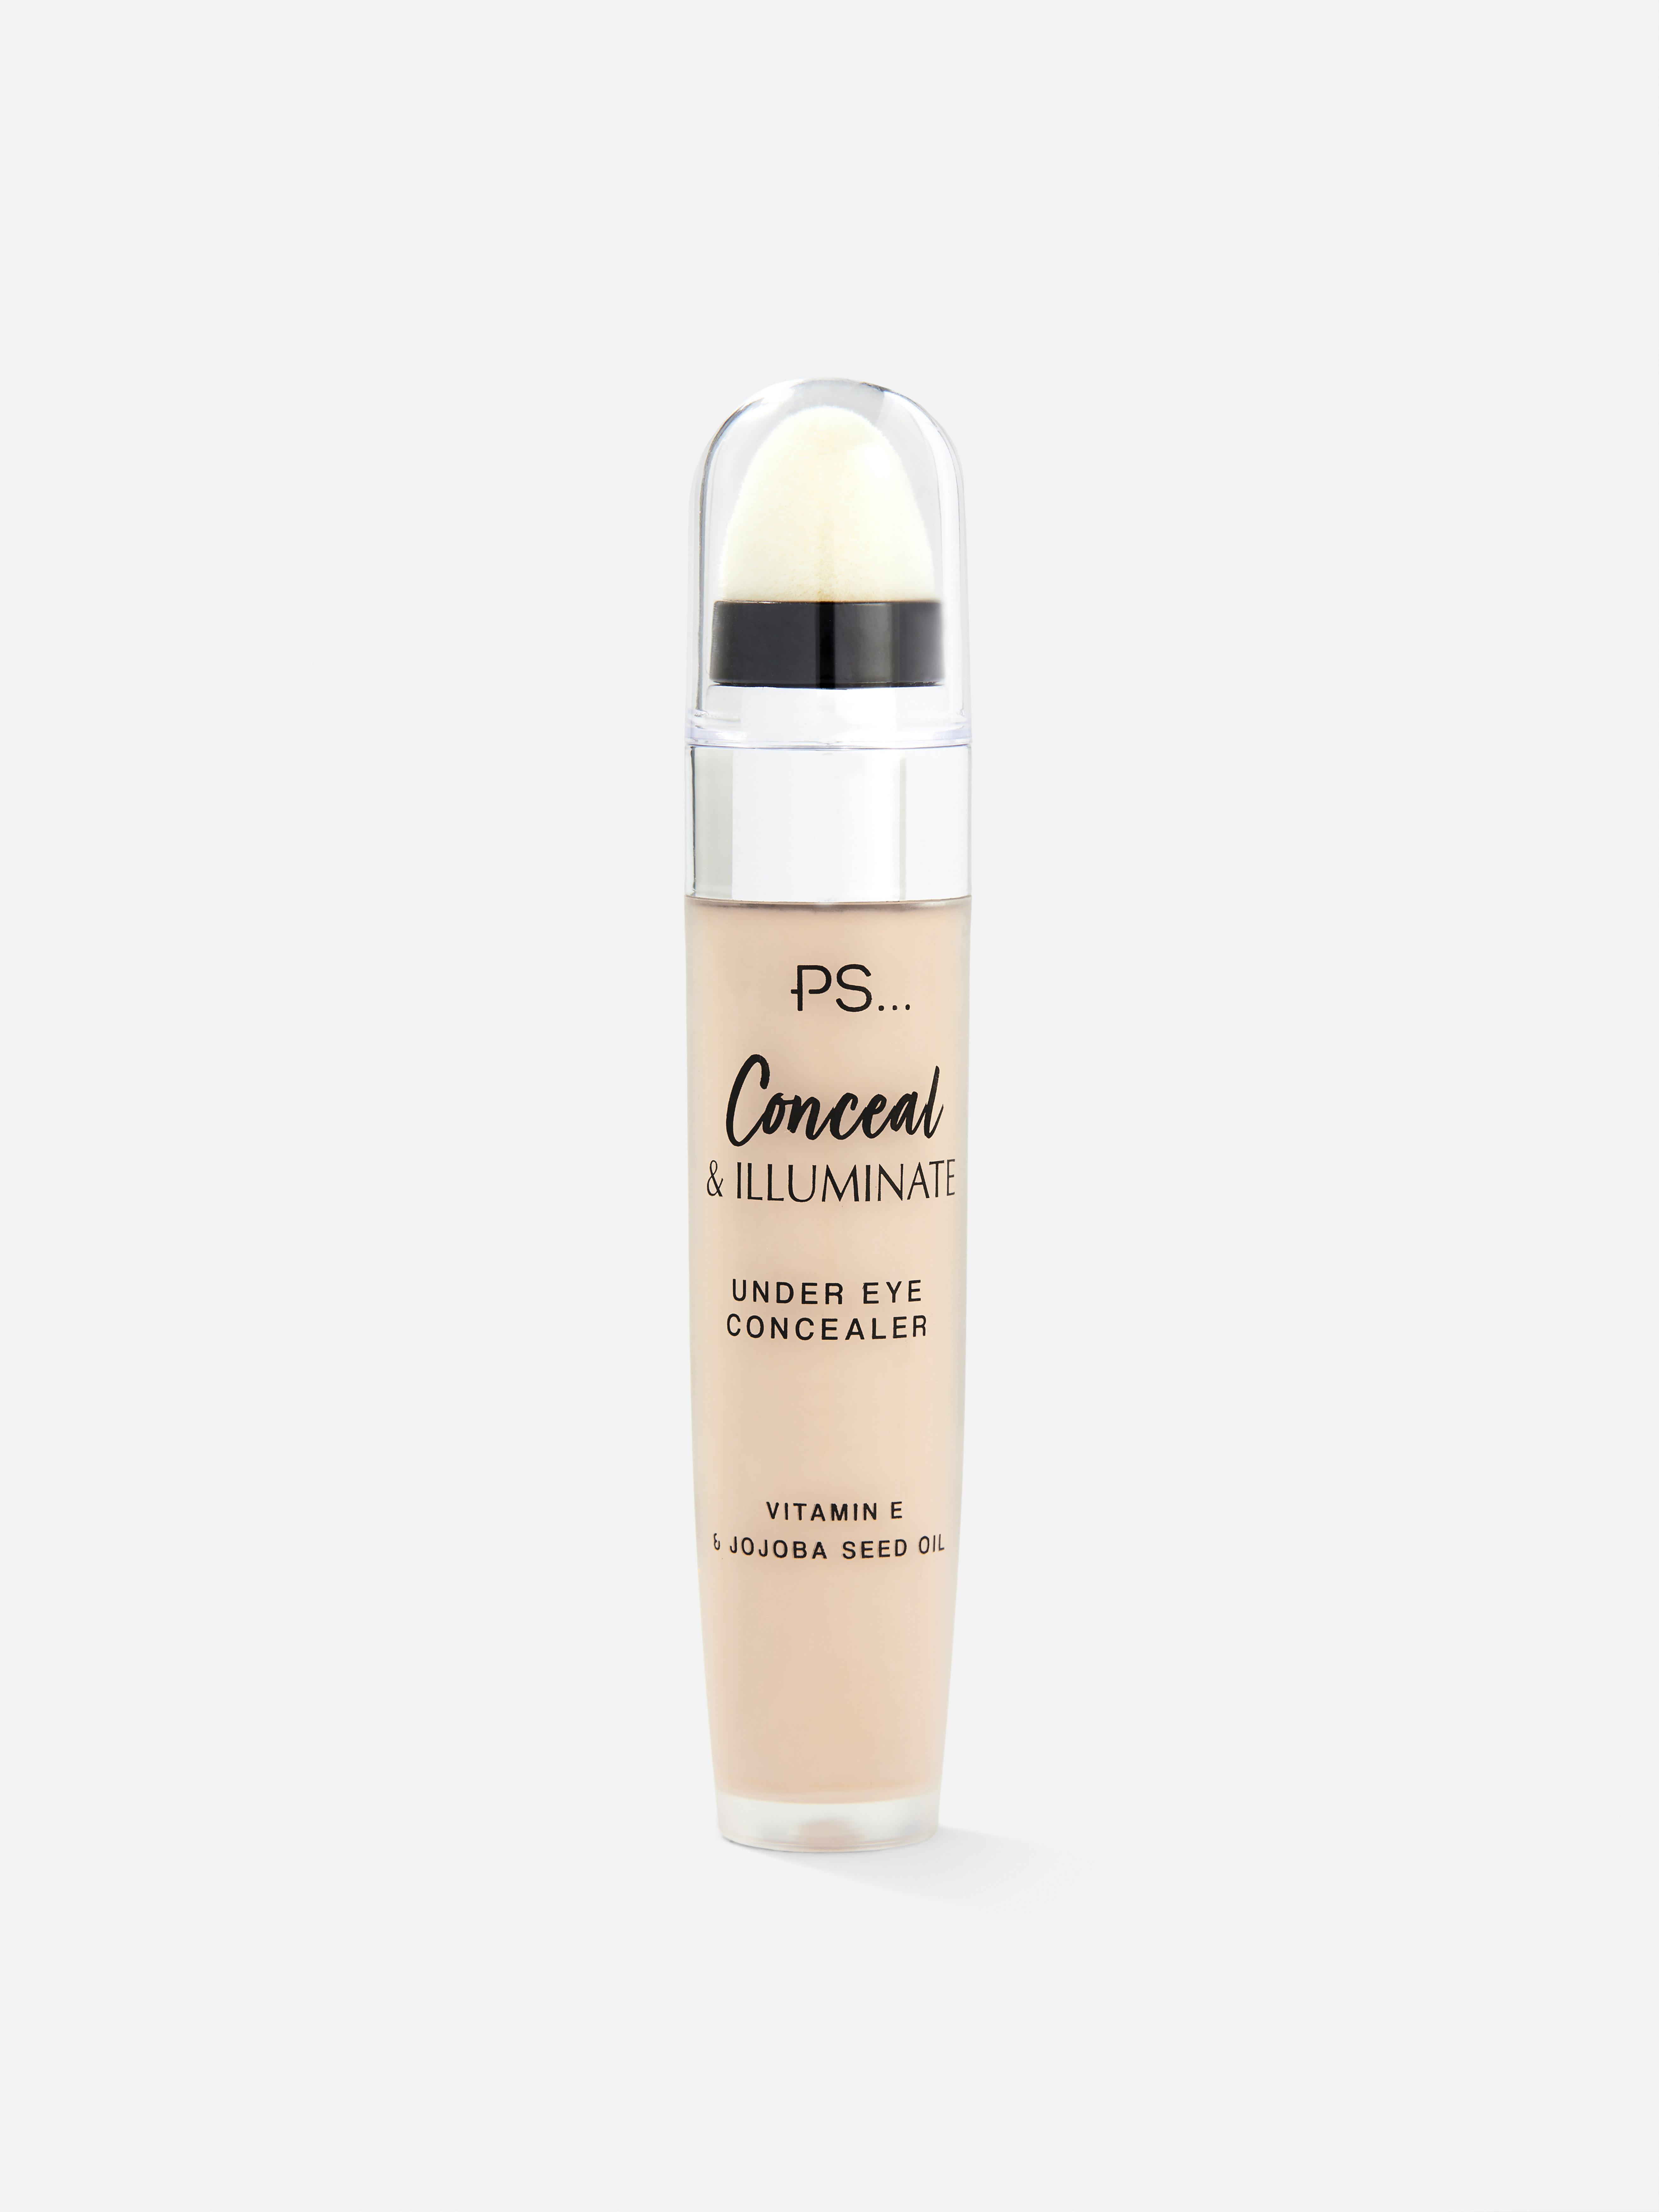 PS… Conceal and Illuminate Under Eye Concealer Nude